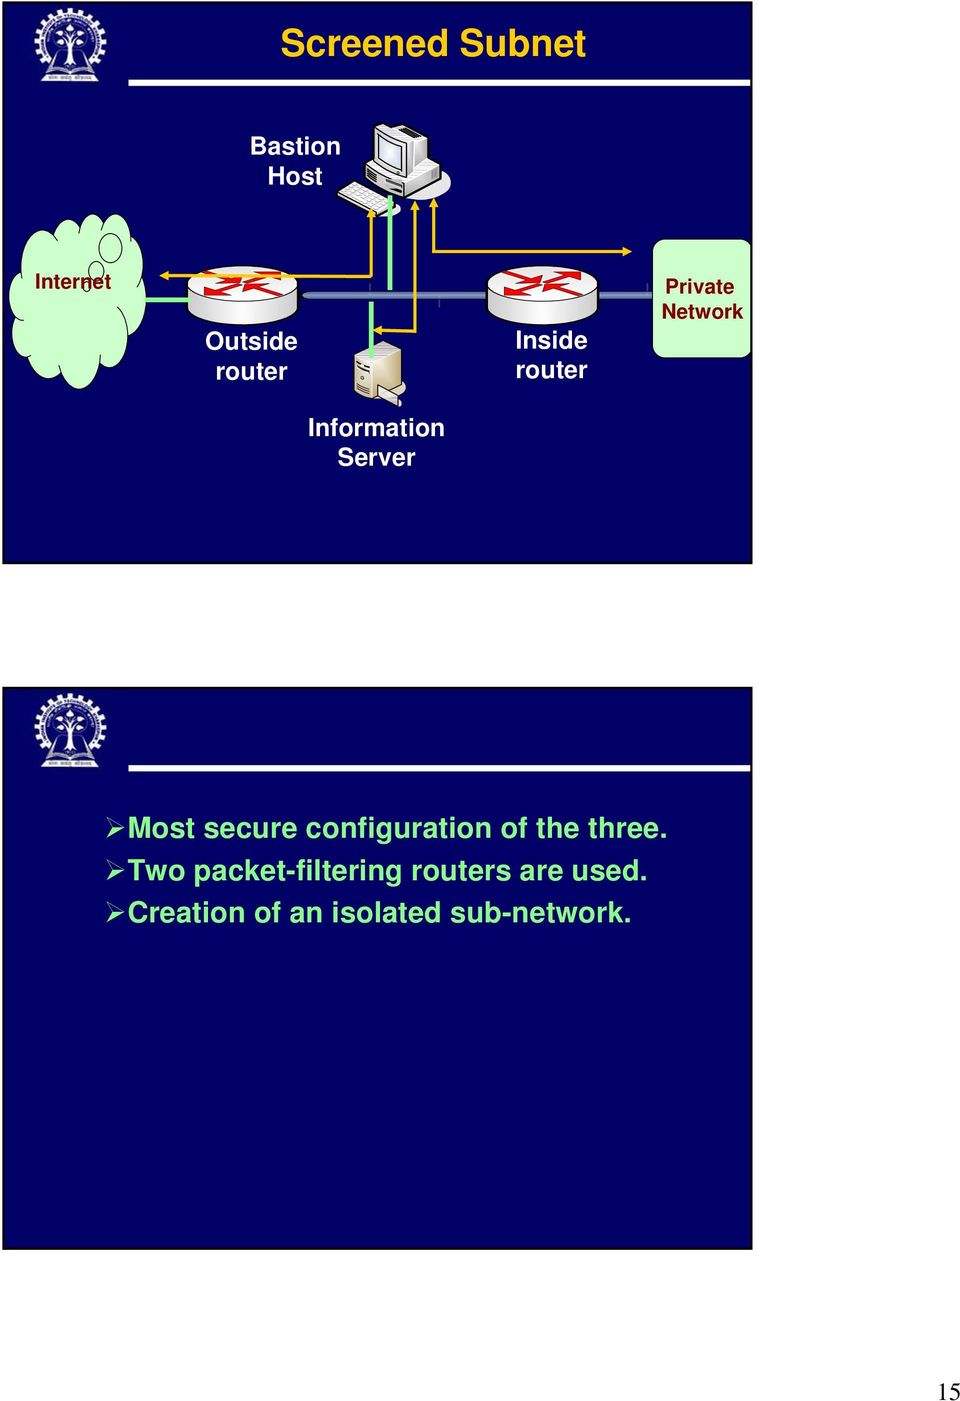 secure configuration of the three.